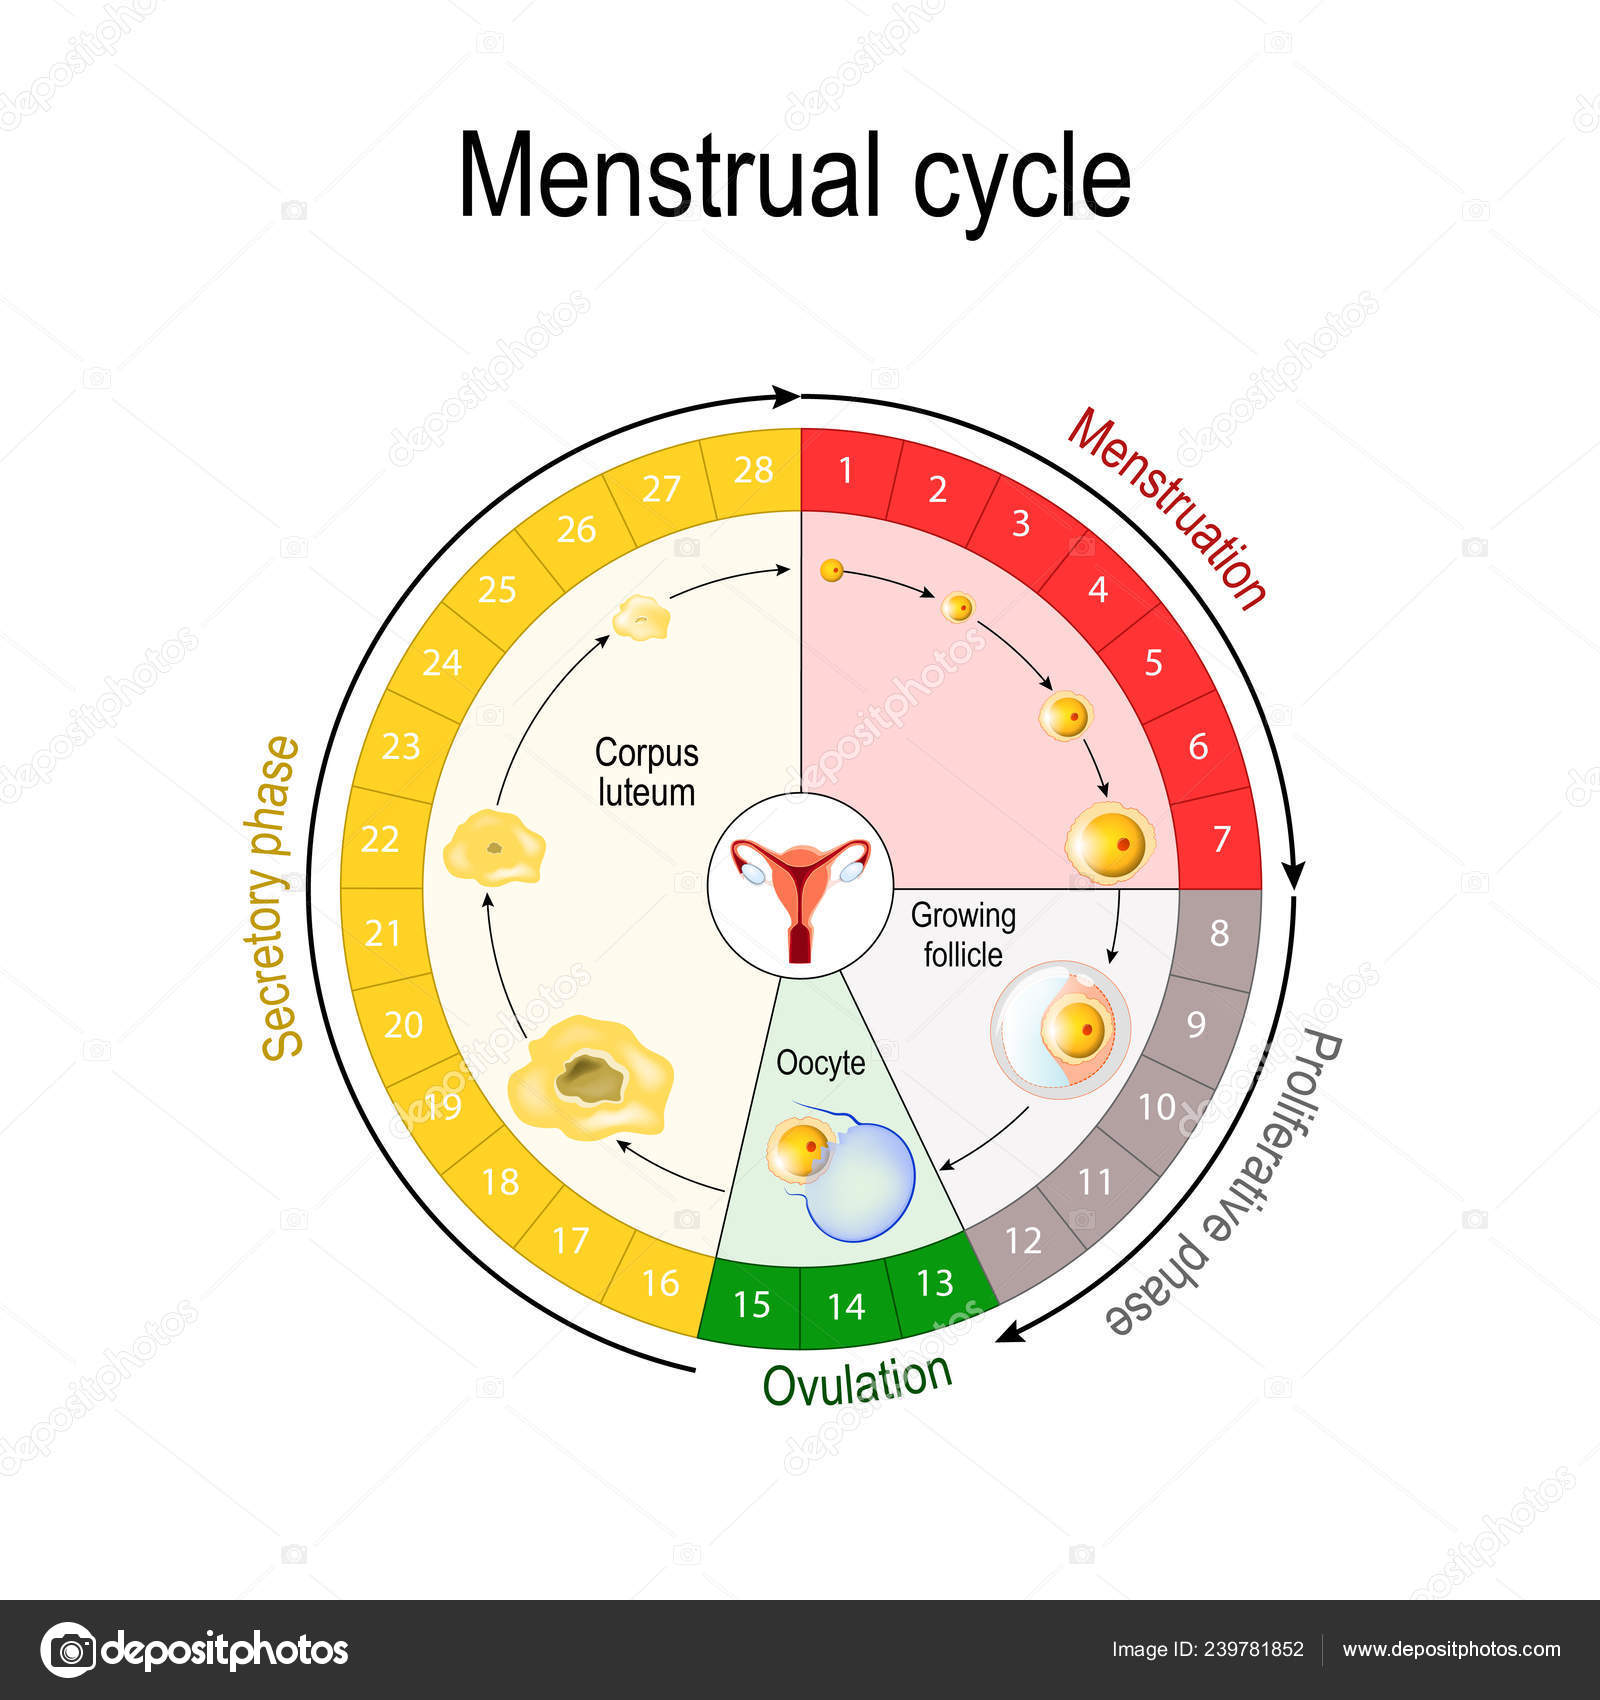 Chart Of Hormones During Menstrual Cycle